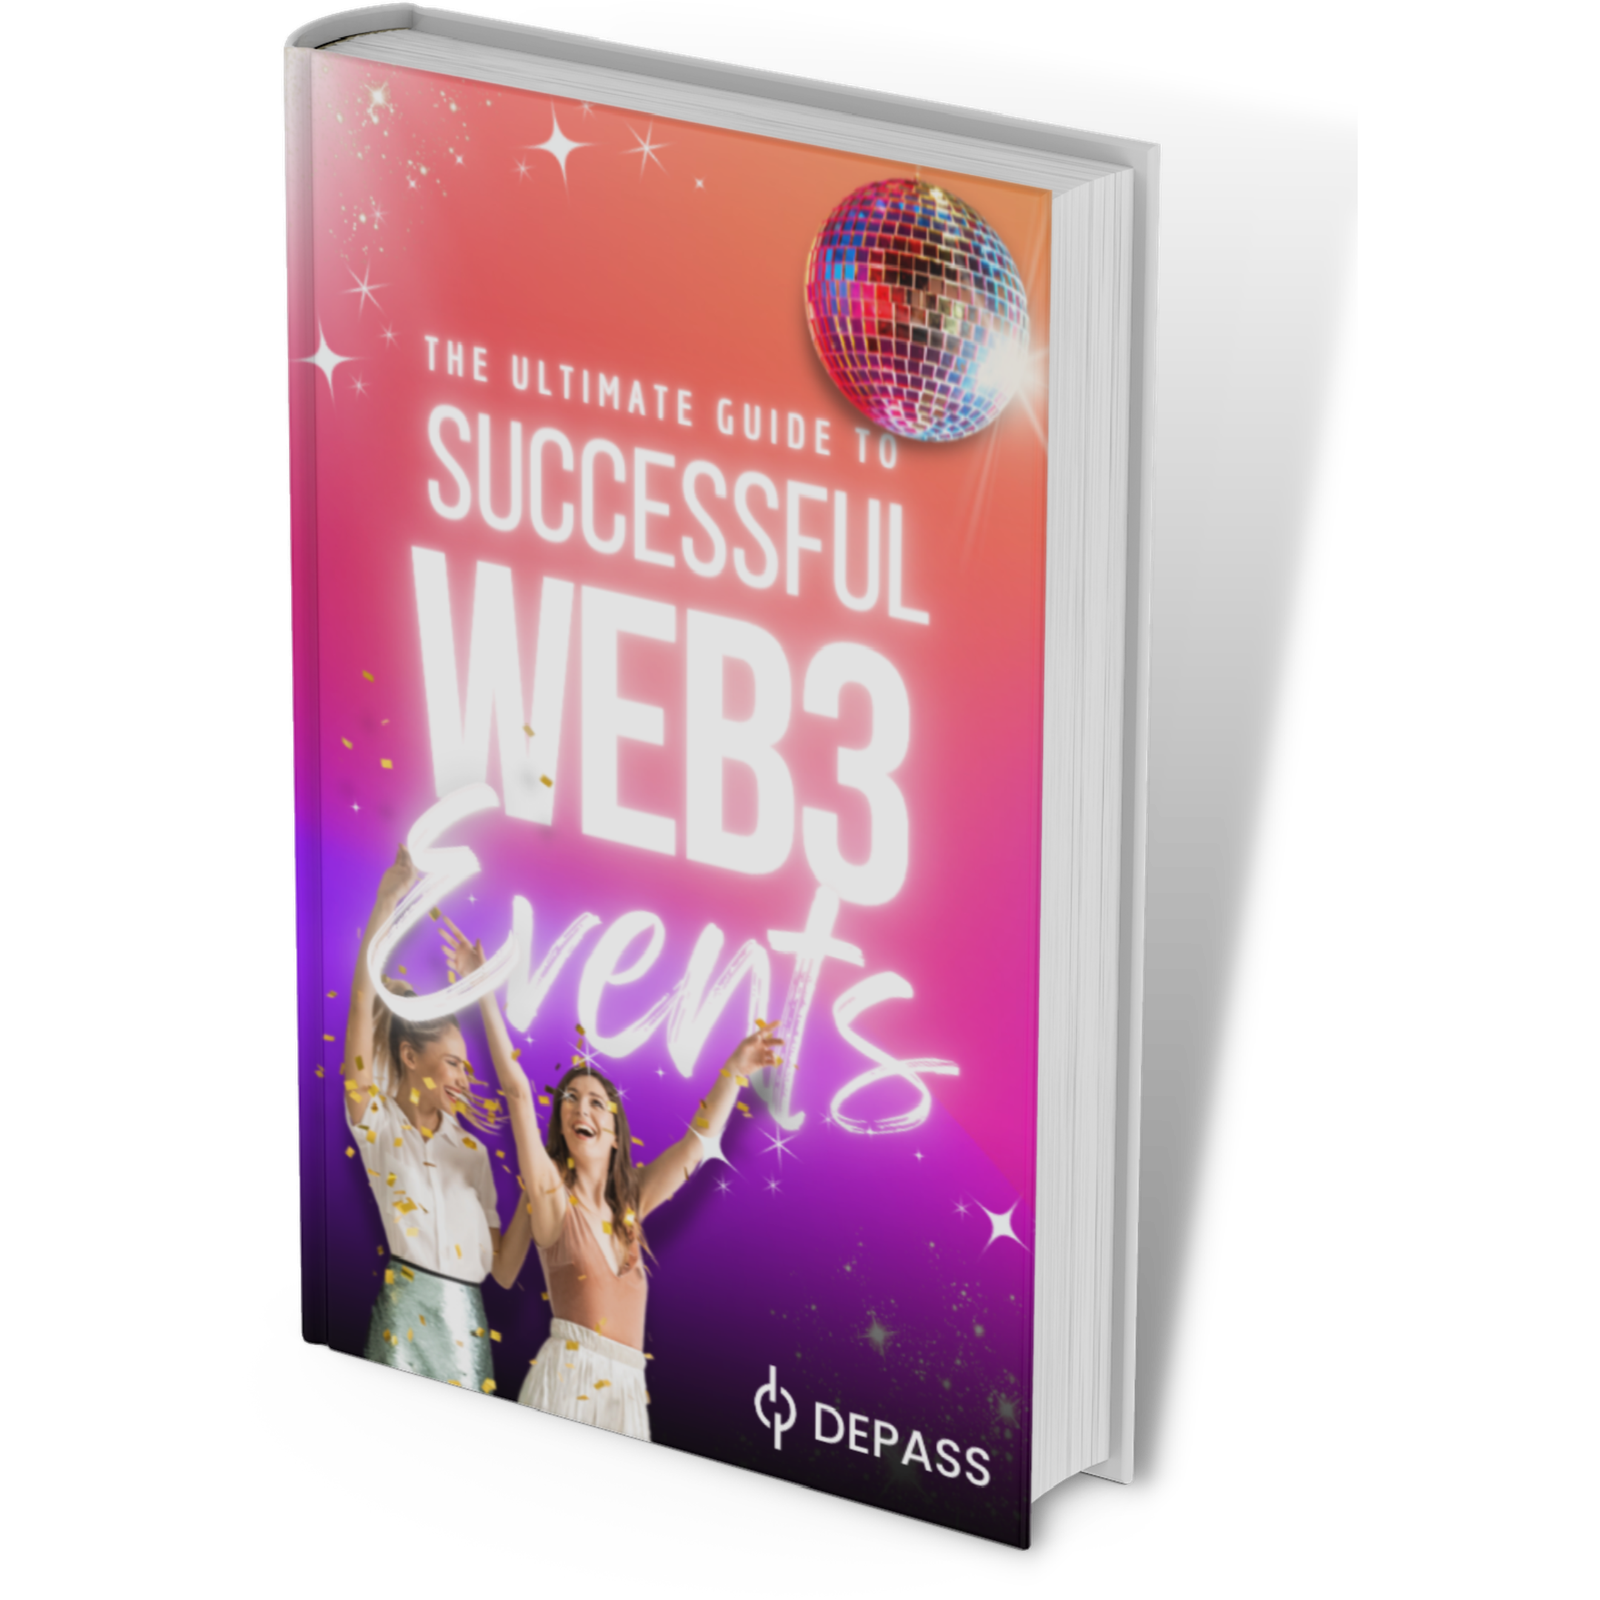 Download our FREE Ultimate Guide to Successful WEB3 Events